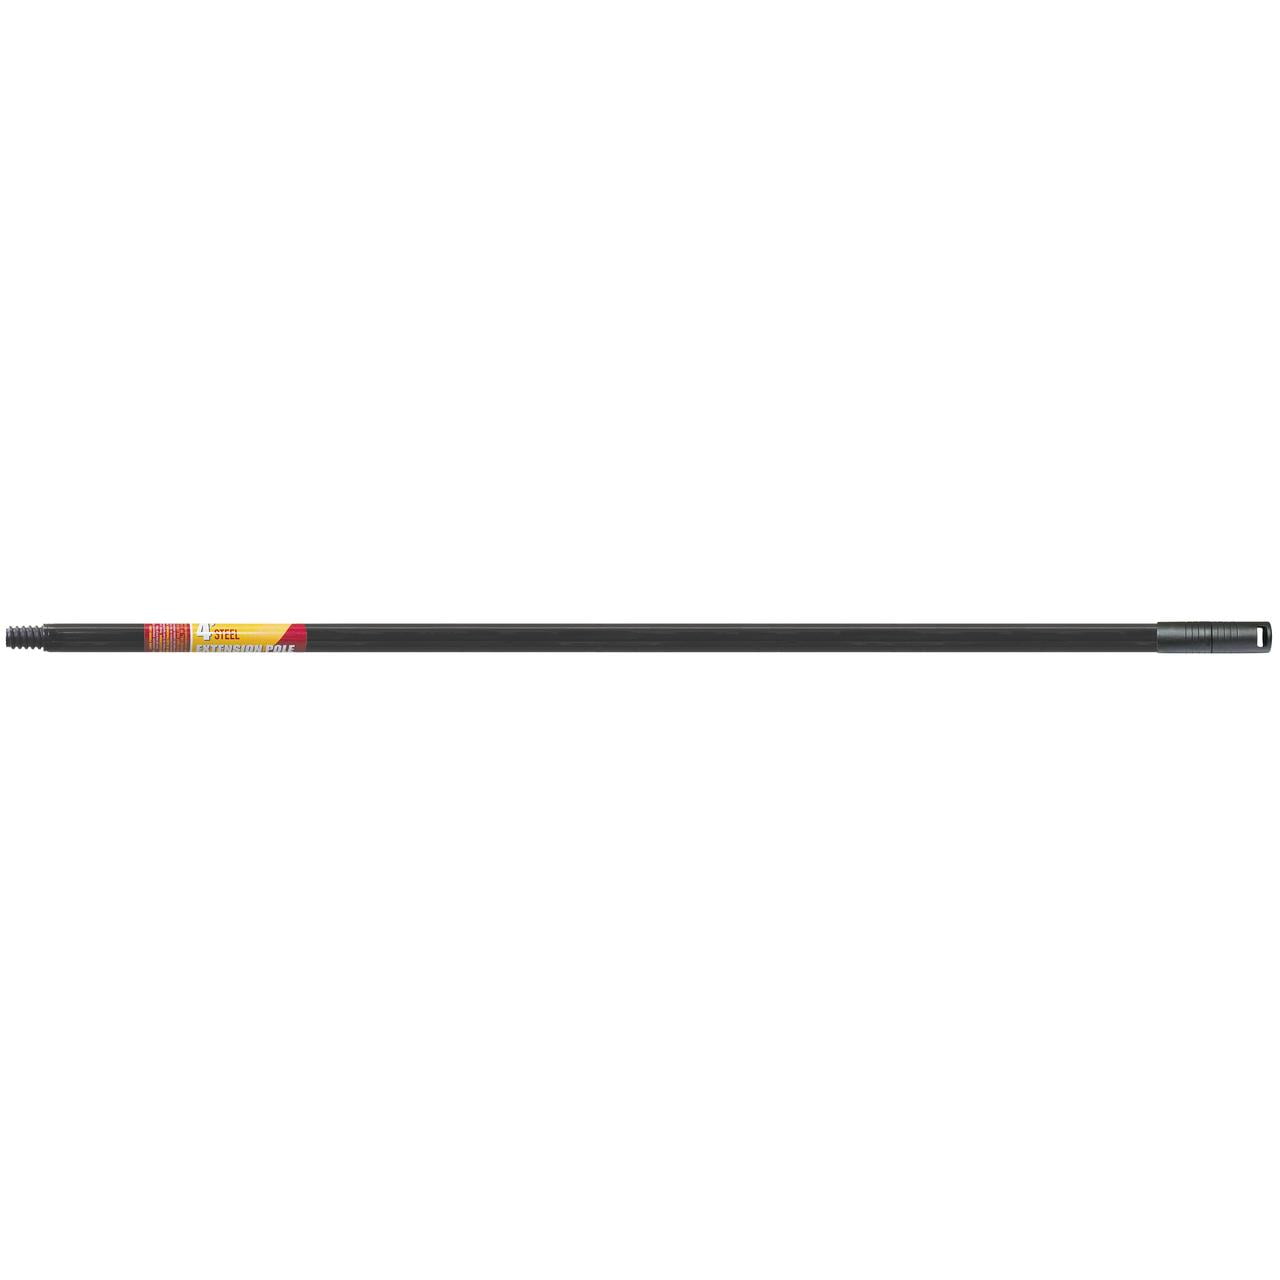 Premier Paint Roller 4ft Steel Extension Pole with Threaded Tip